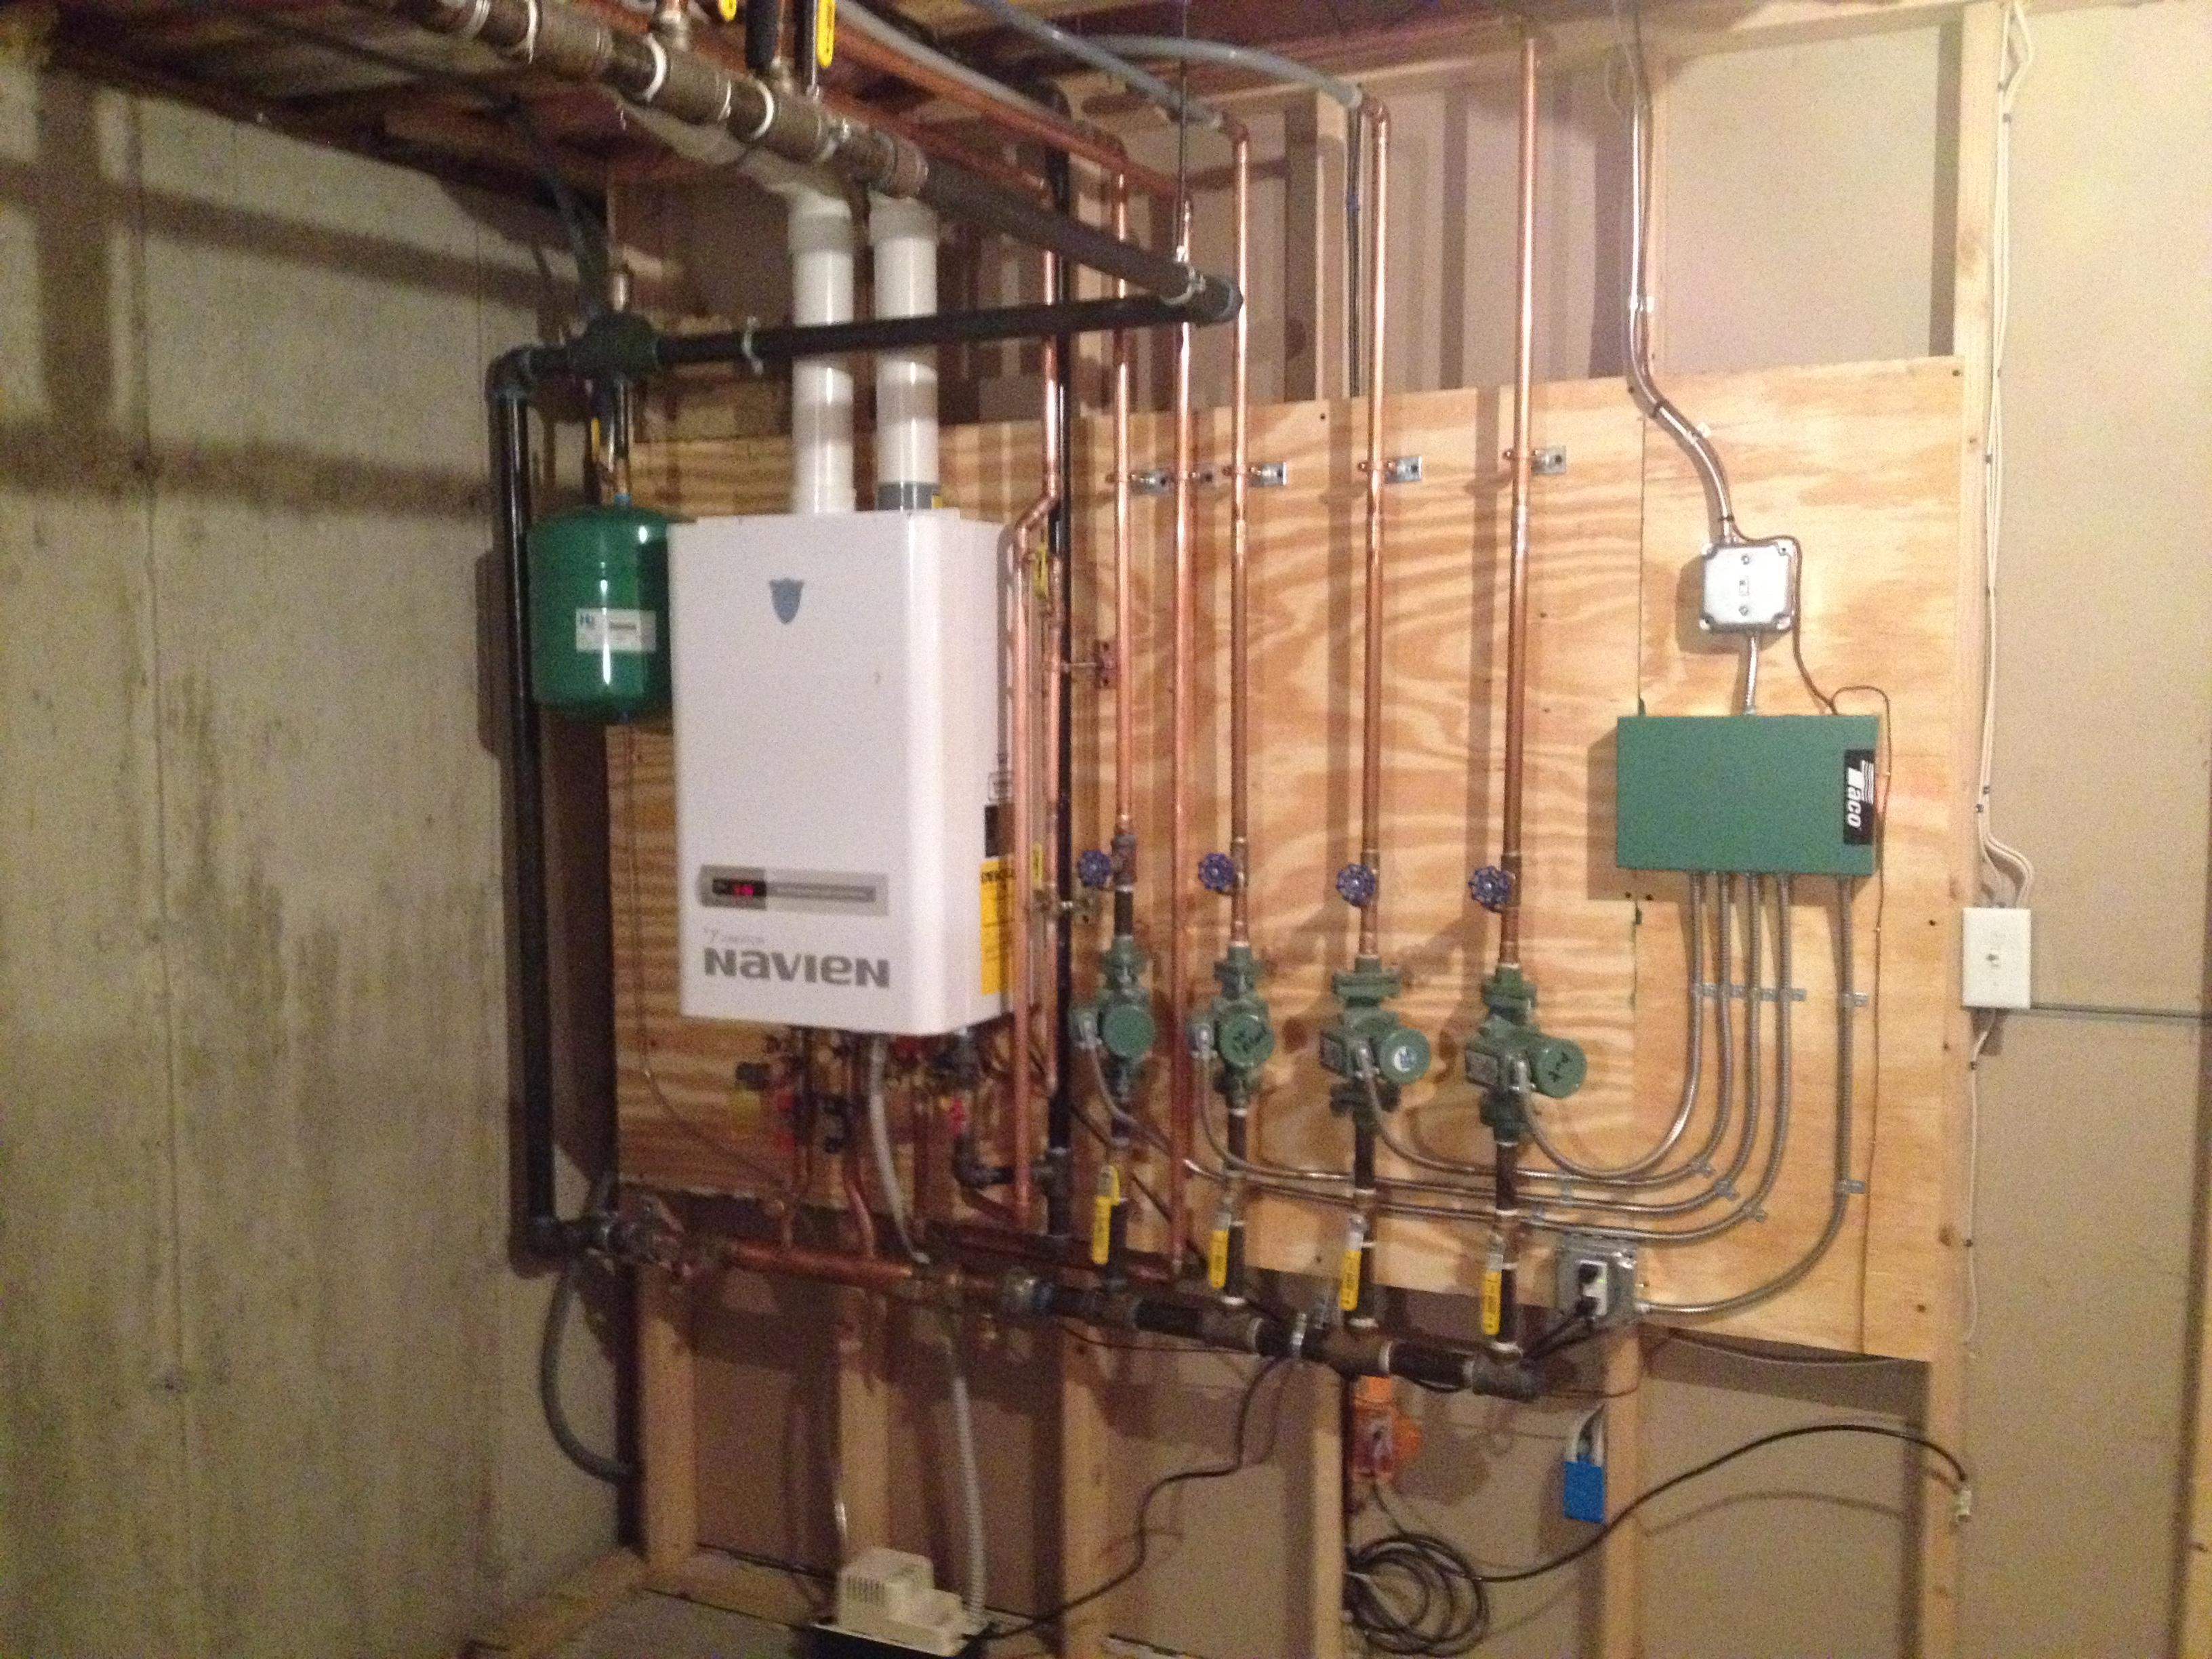 We saved our client space and money with the installation of a highly efficient wall hung boiler, in place of her old oil burner!